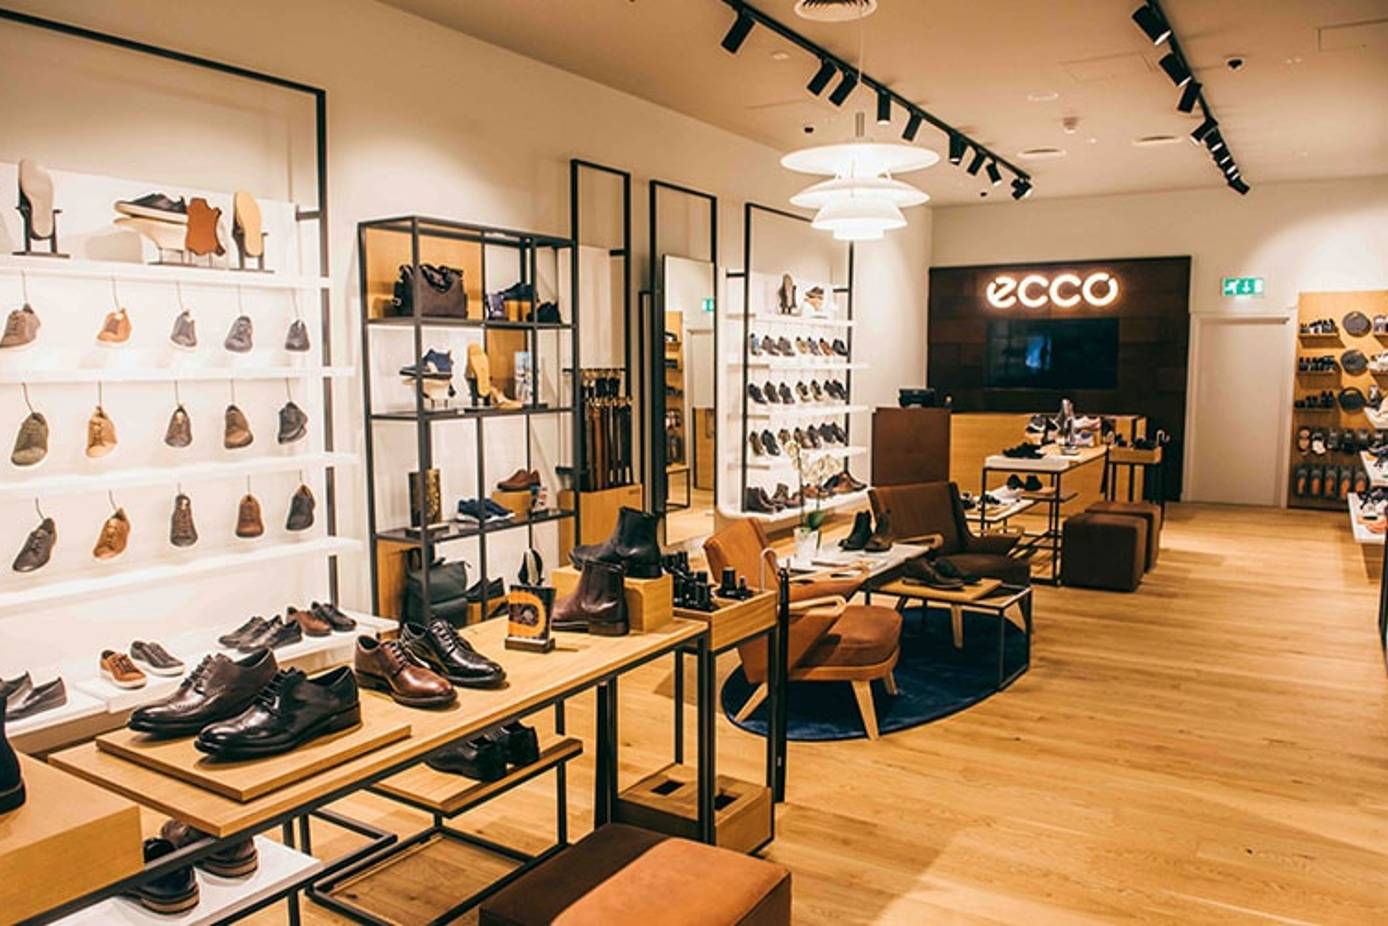 Ecco relocates to larger at David's